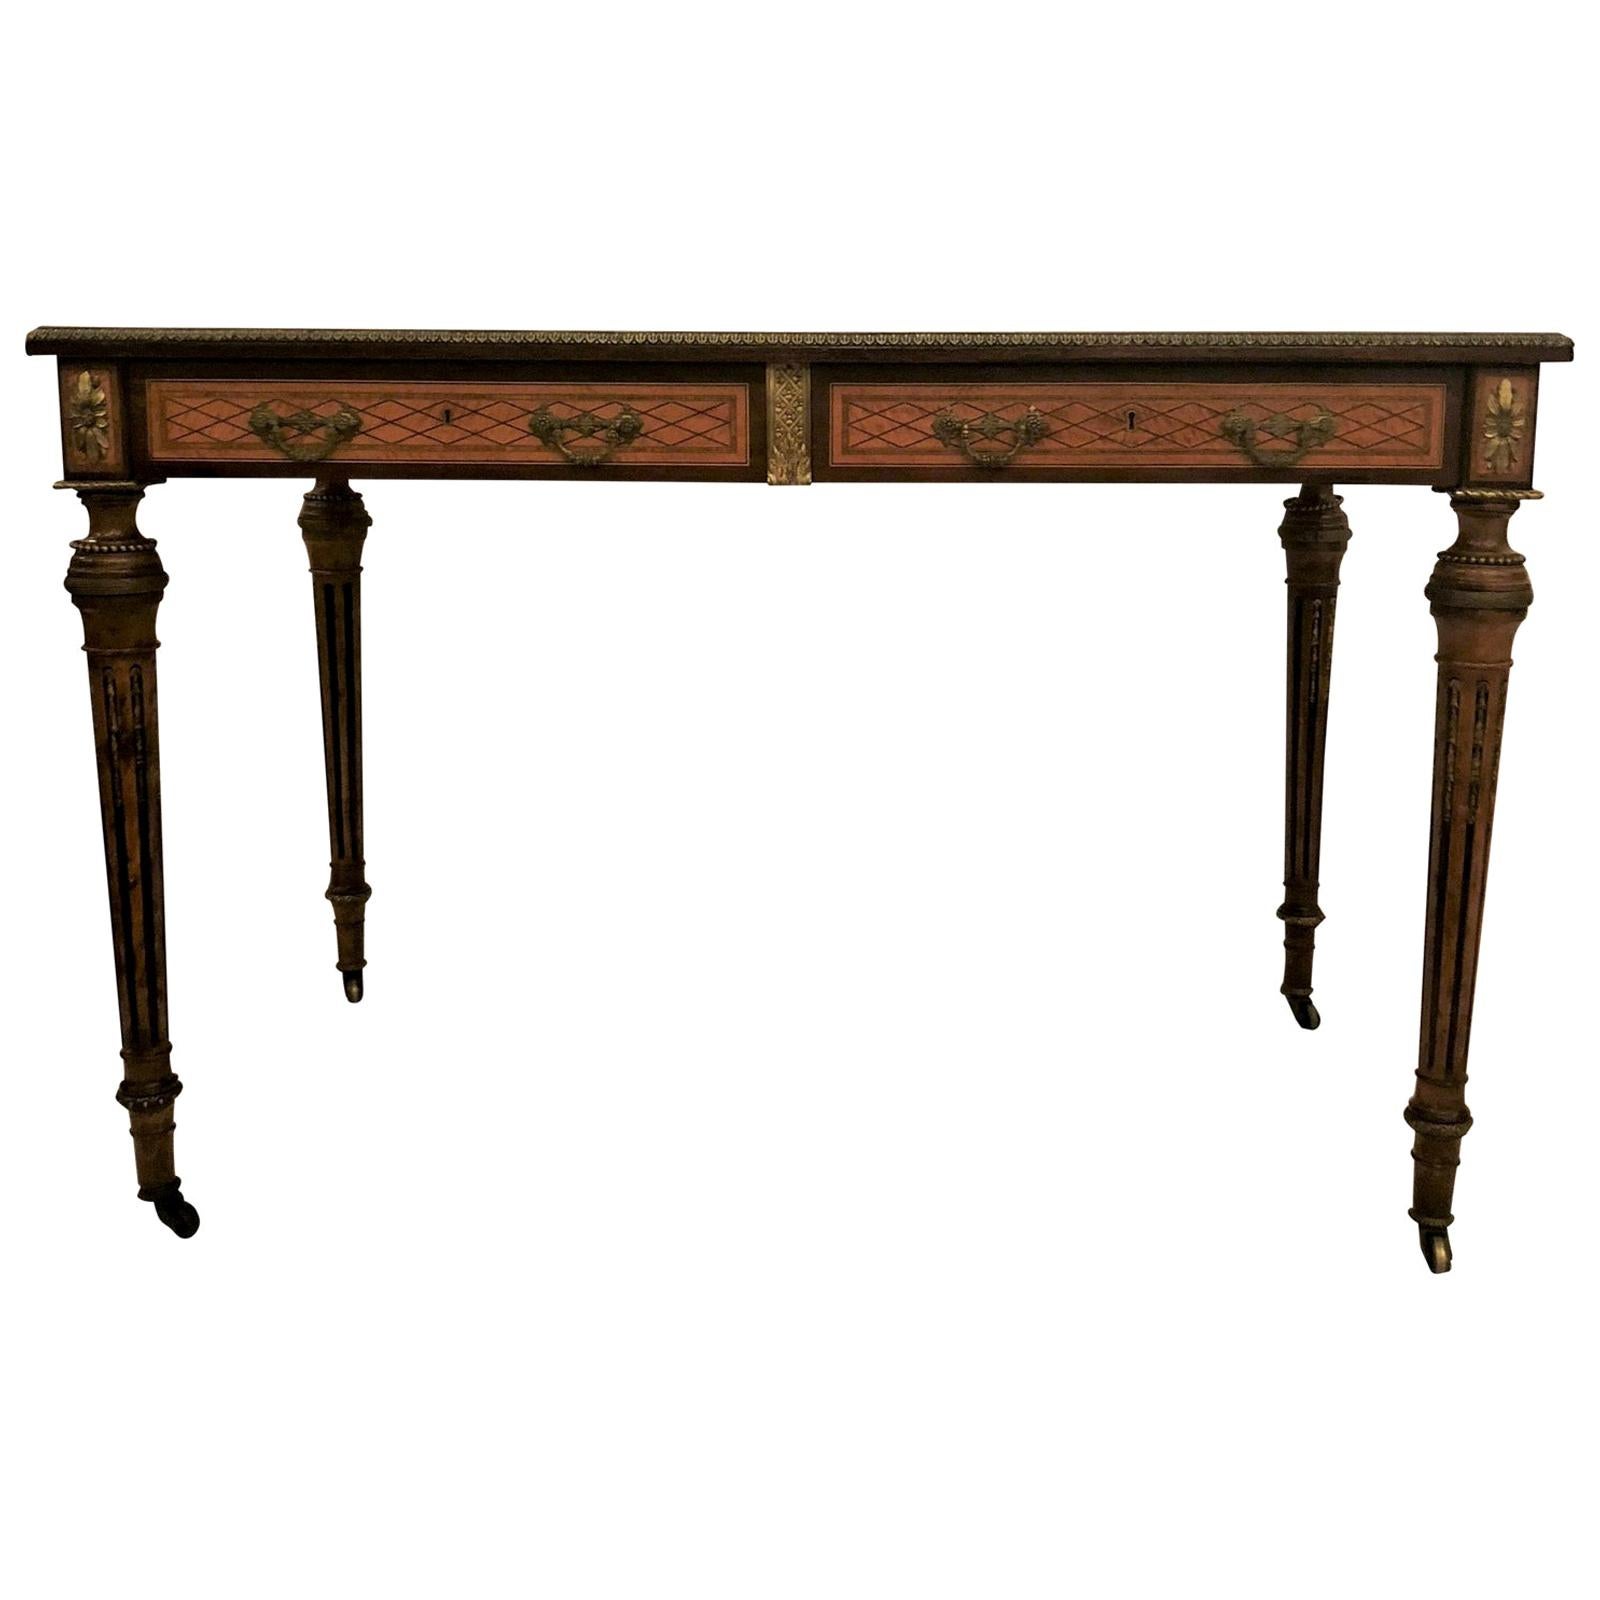 Antique 19th Century French Museum Quality Inlaid Writing Table with Bronze Trim For Sale